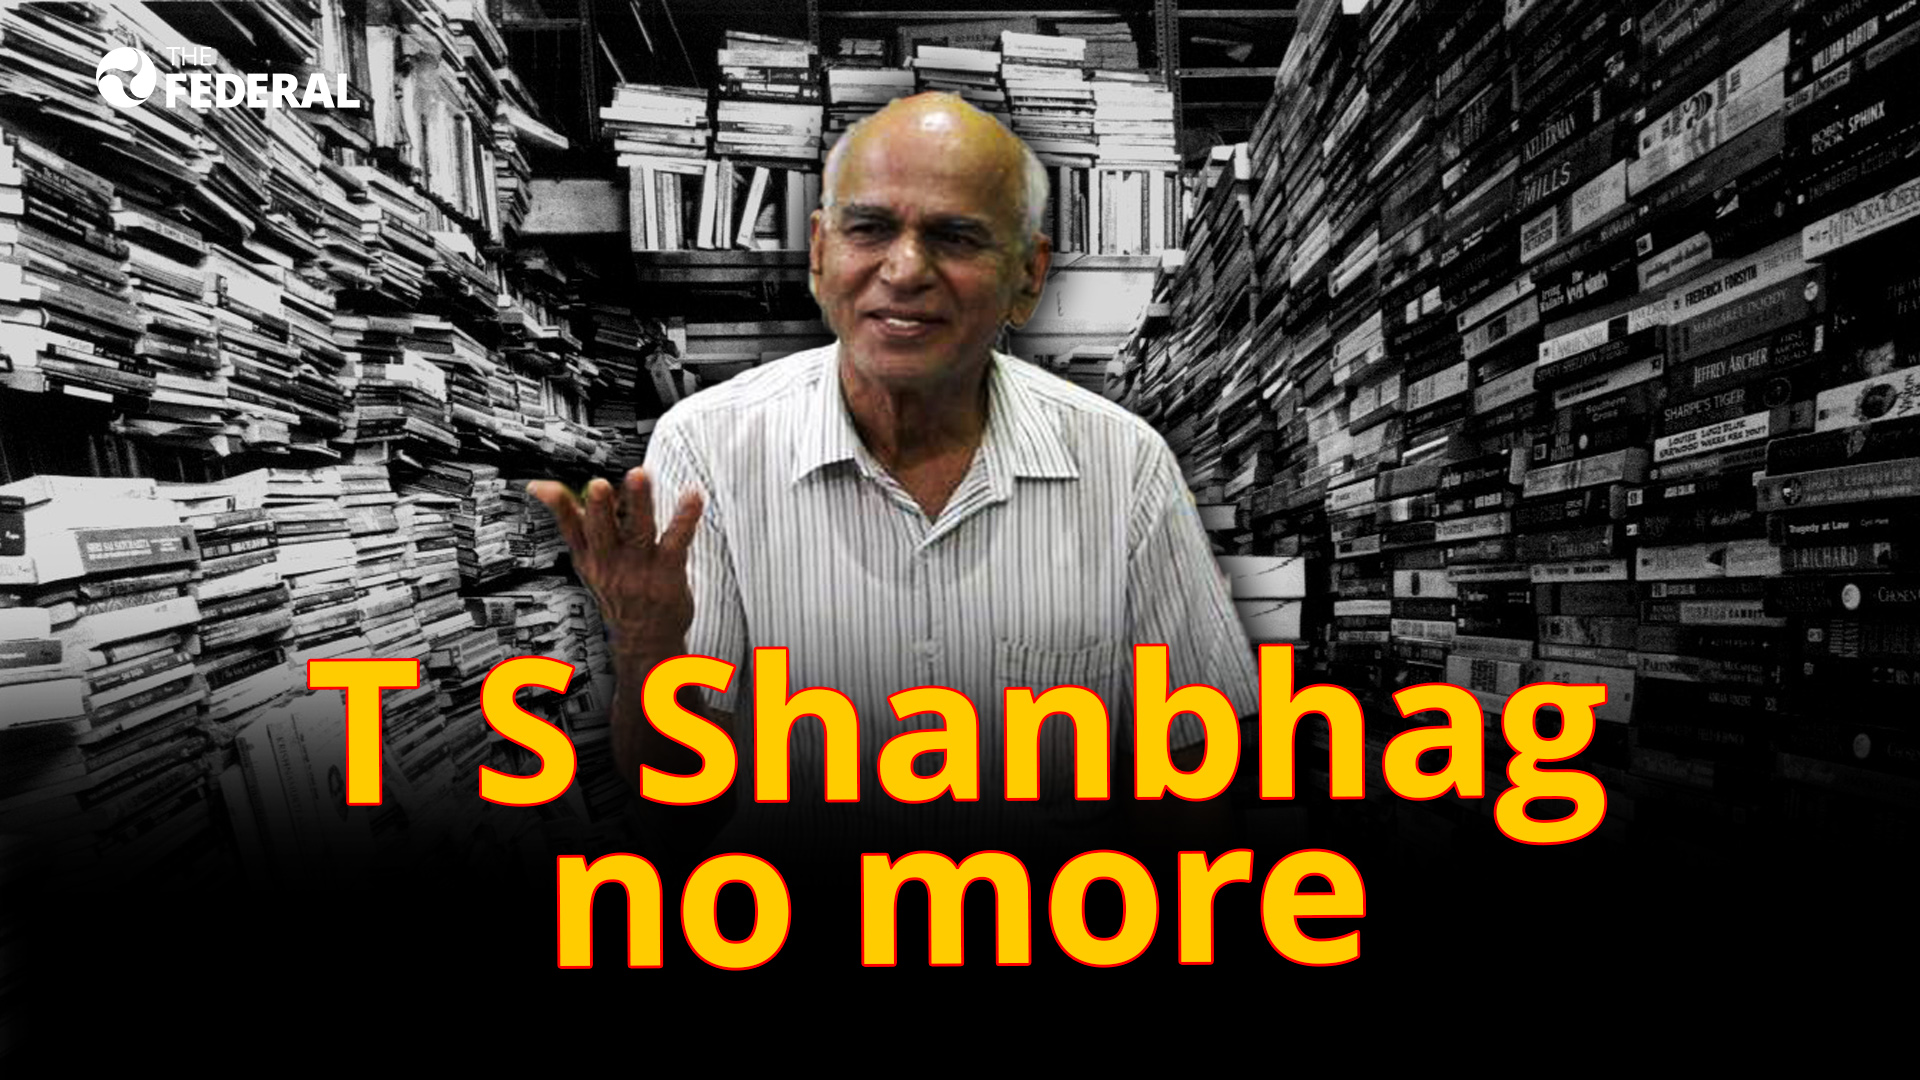 Bengaluru mourns death of iconic bookshop owner